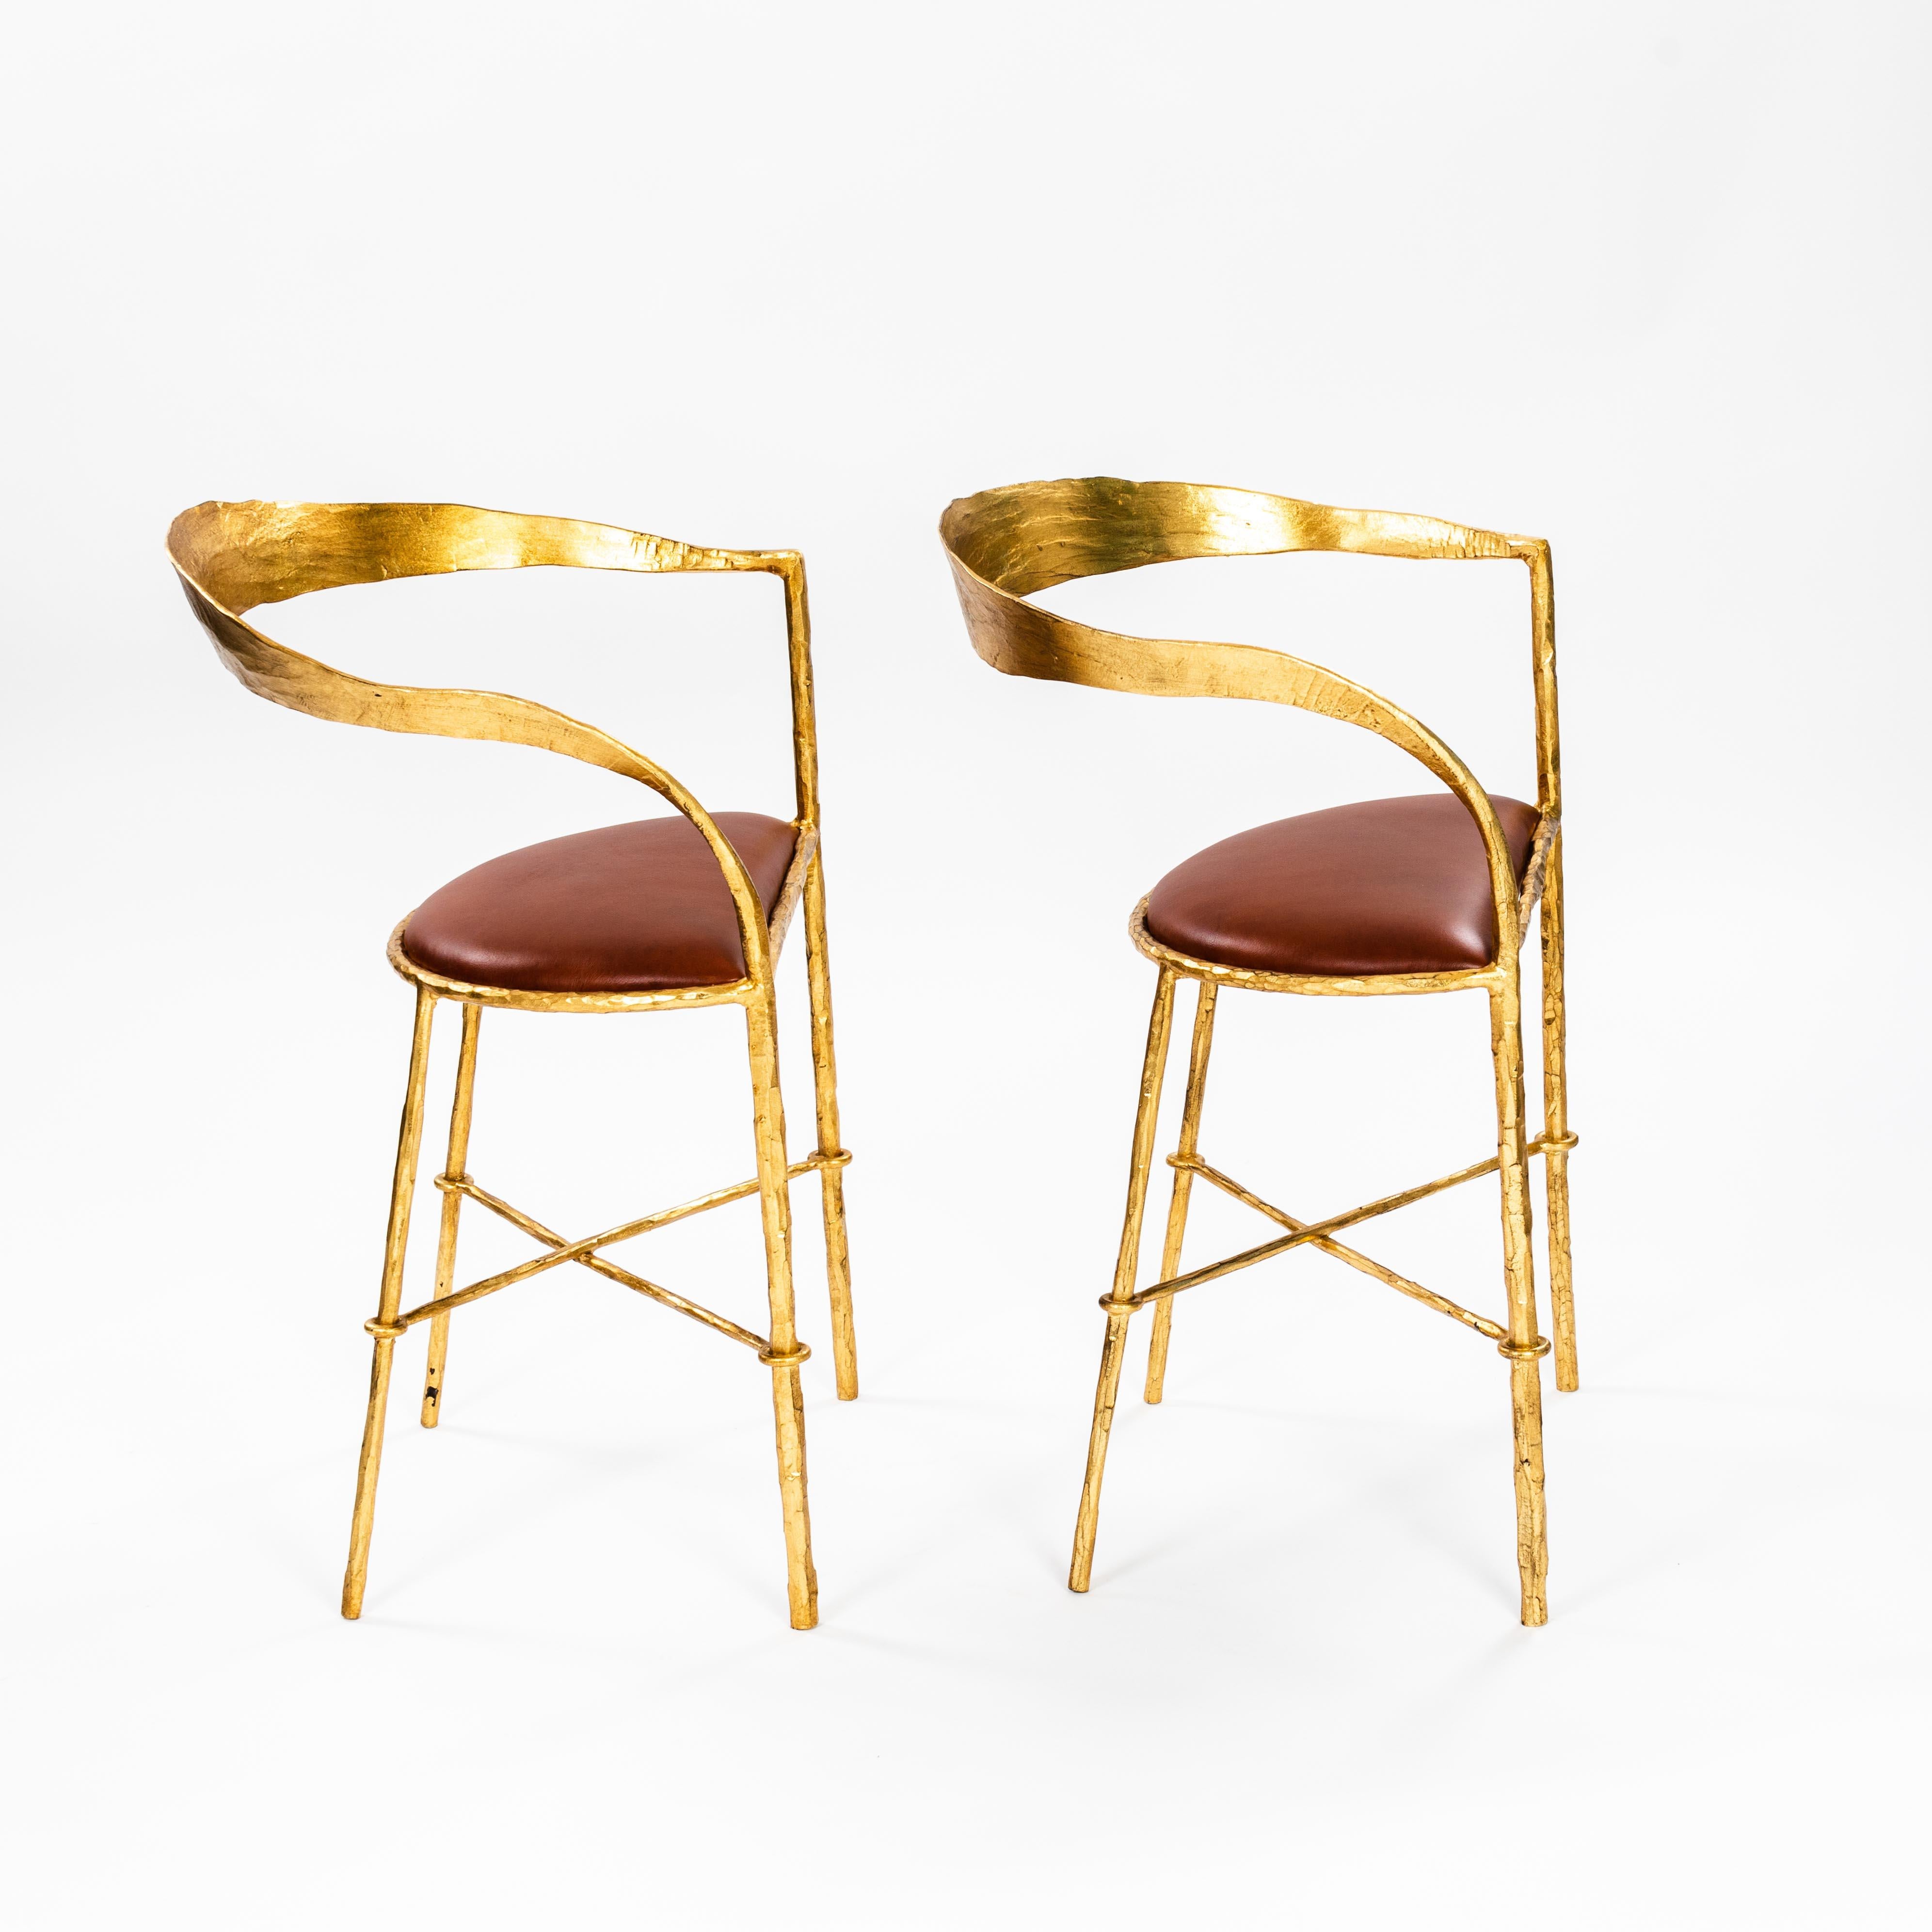 Late 20th Century Pair of Hand Forged Gold Plated Mid-Century Armchairs by Banci Florence 1970s For Sale